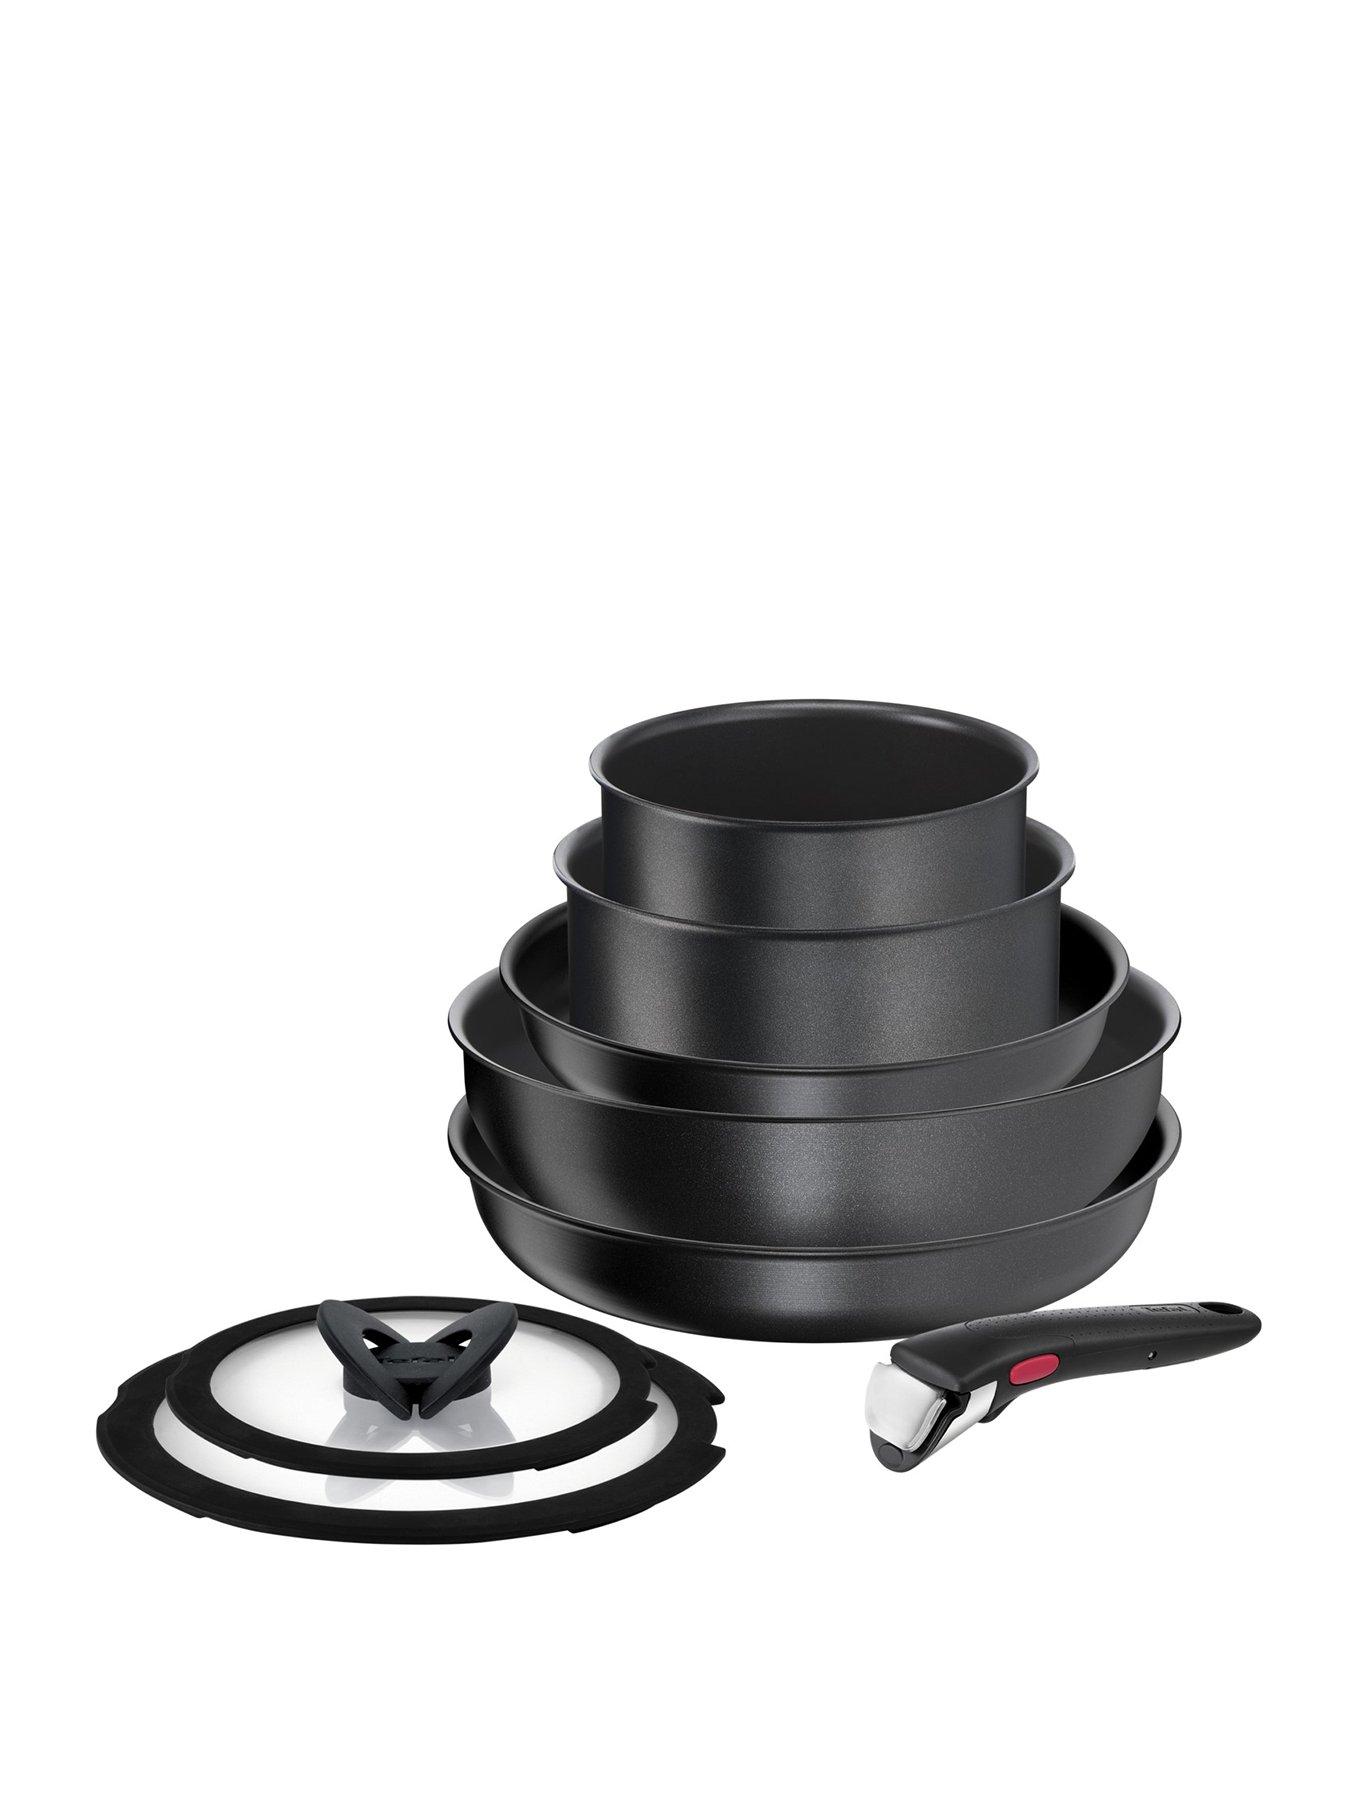 Tefal L7629002 Ingenio Daily Chef 4-piece cookware set